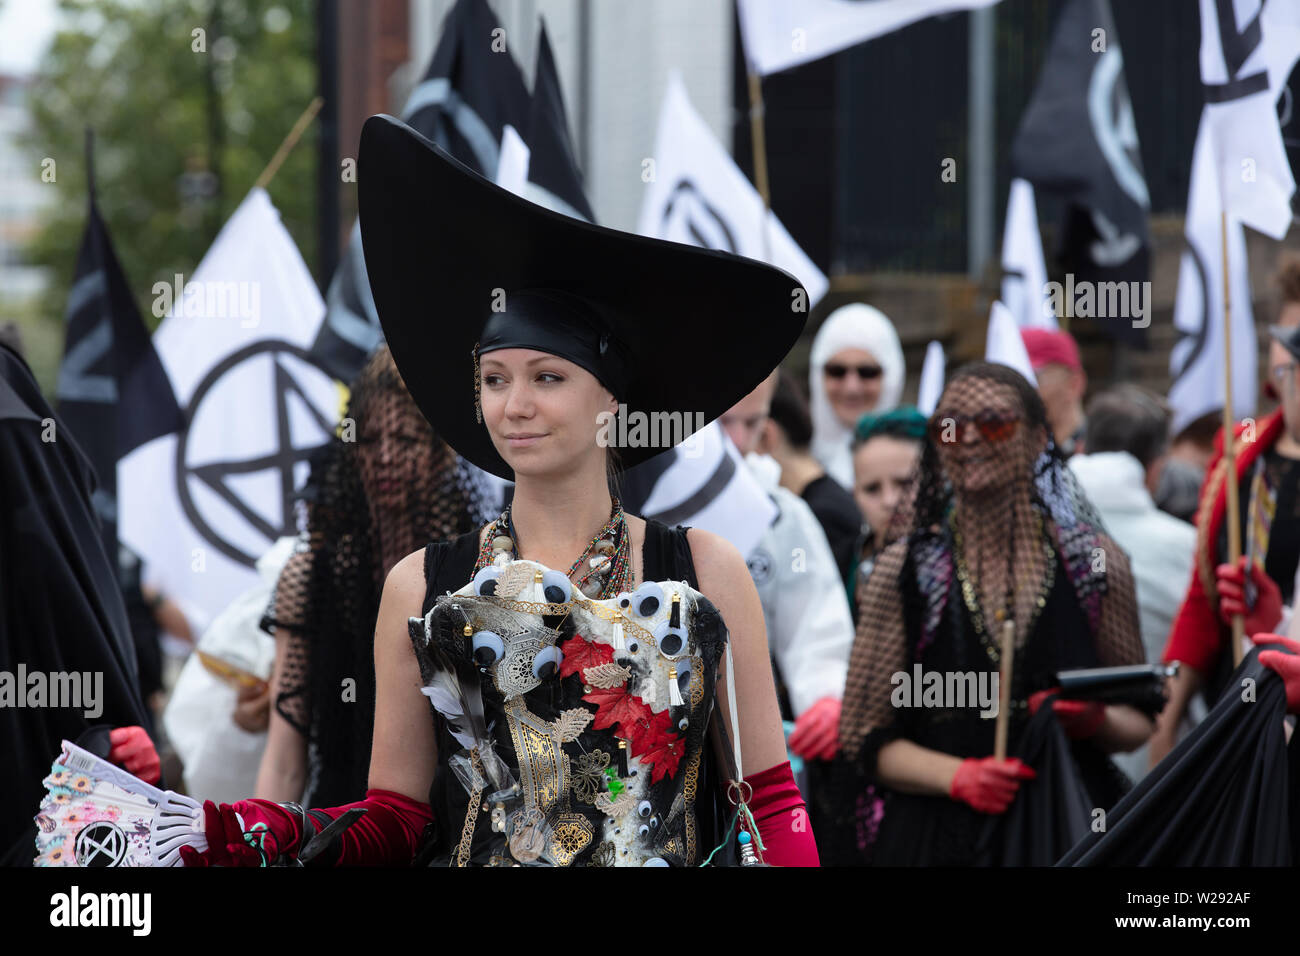 London, UK. 2nd July 2019. Extinction Rebellion Arts and Culture Group creating a silent procession to and theatre in front of several fossil fuel companies. The protest play is based on Bizet's opera Carmen, with real life actors and an opera singer. Credit: Joe Kuis / Alamy News Stock Photo